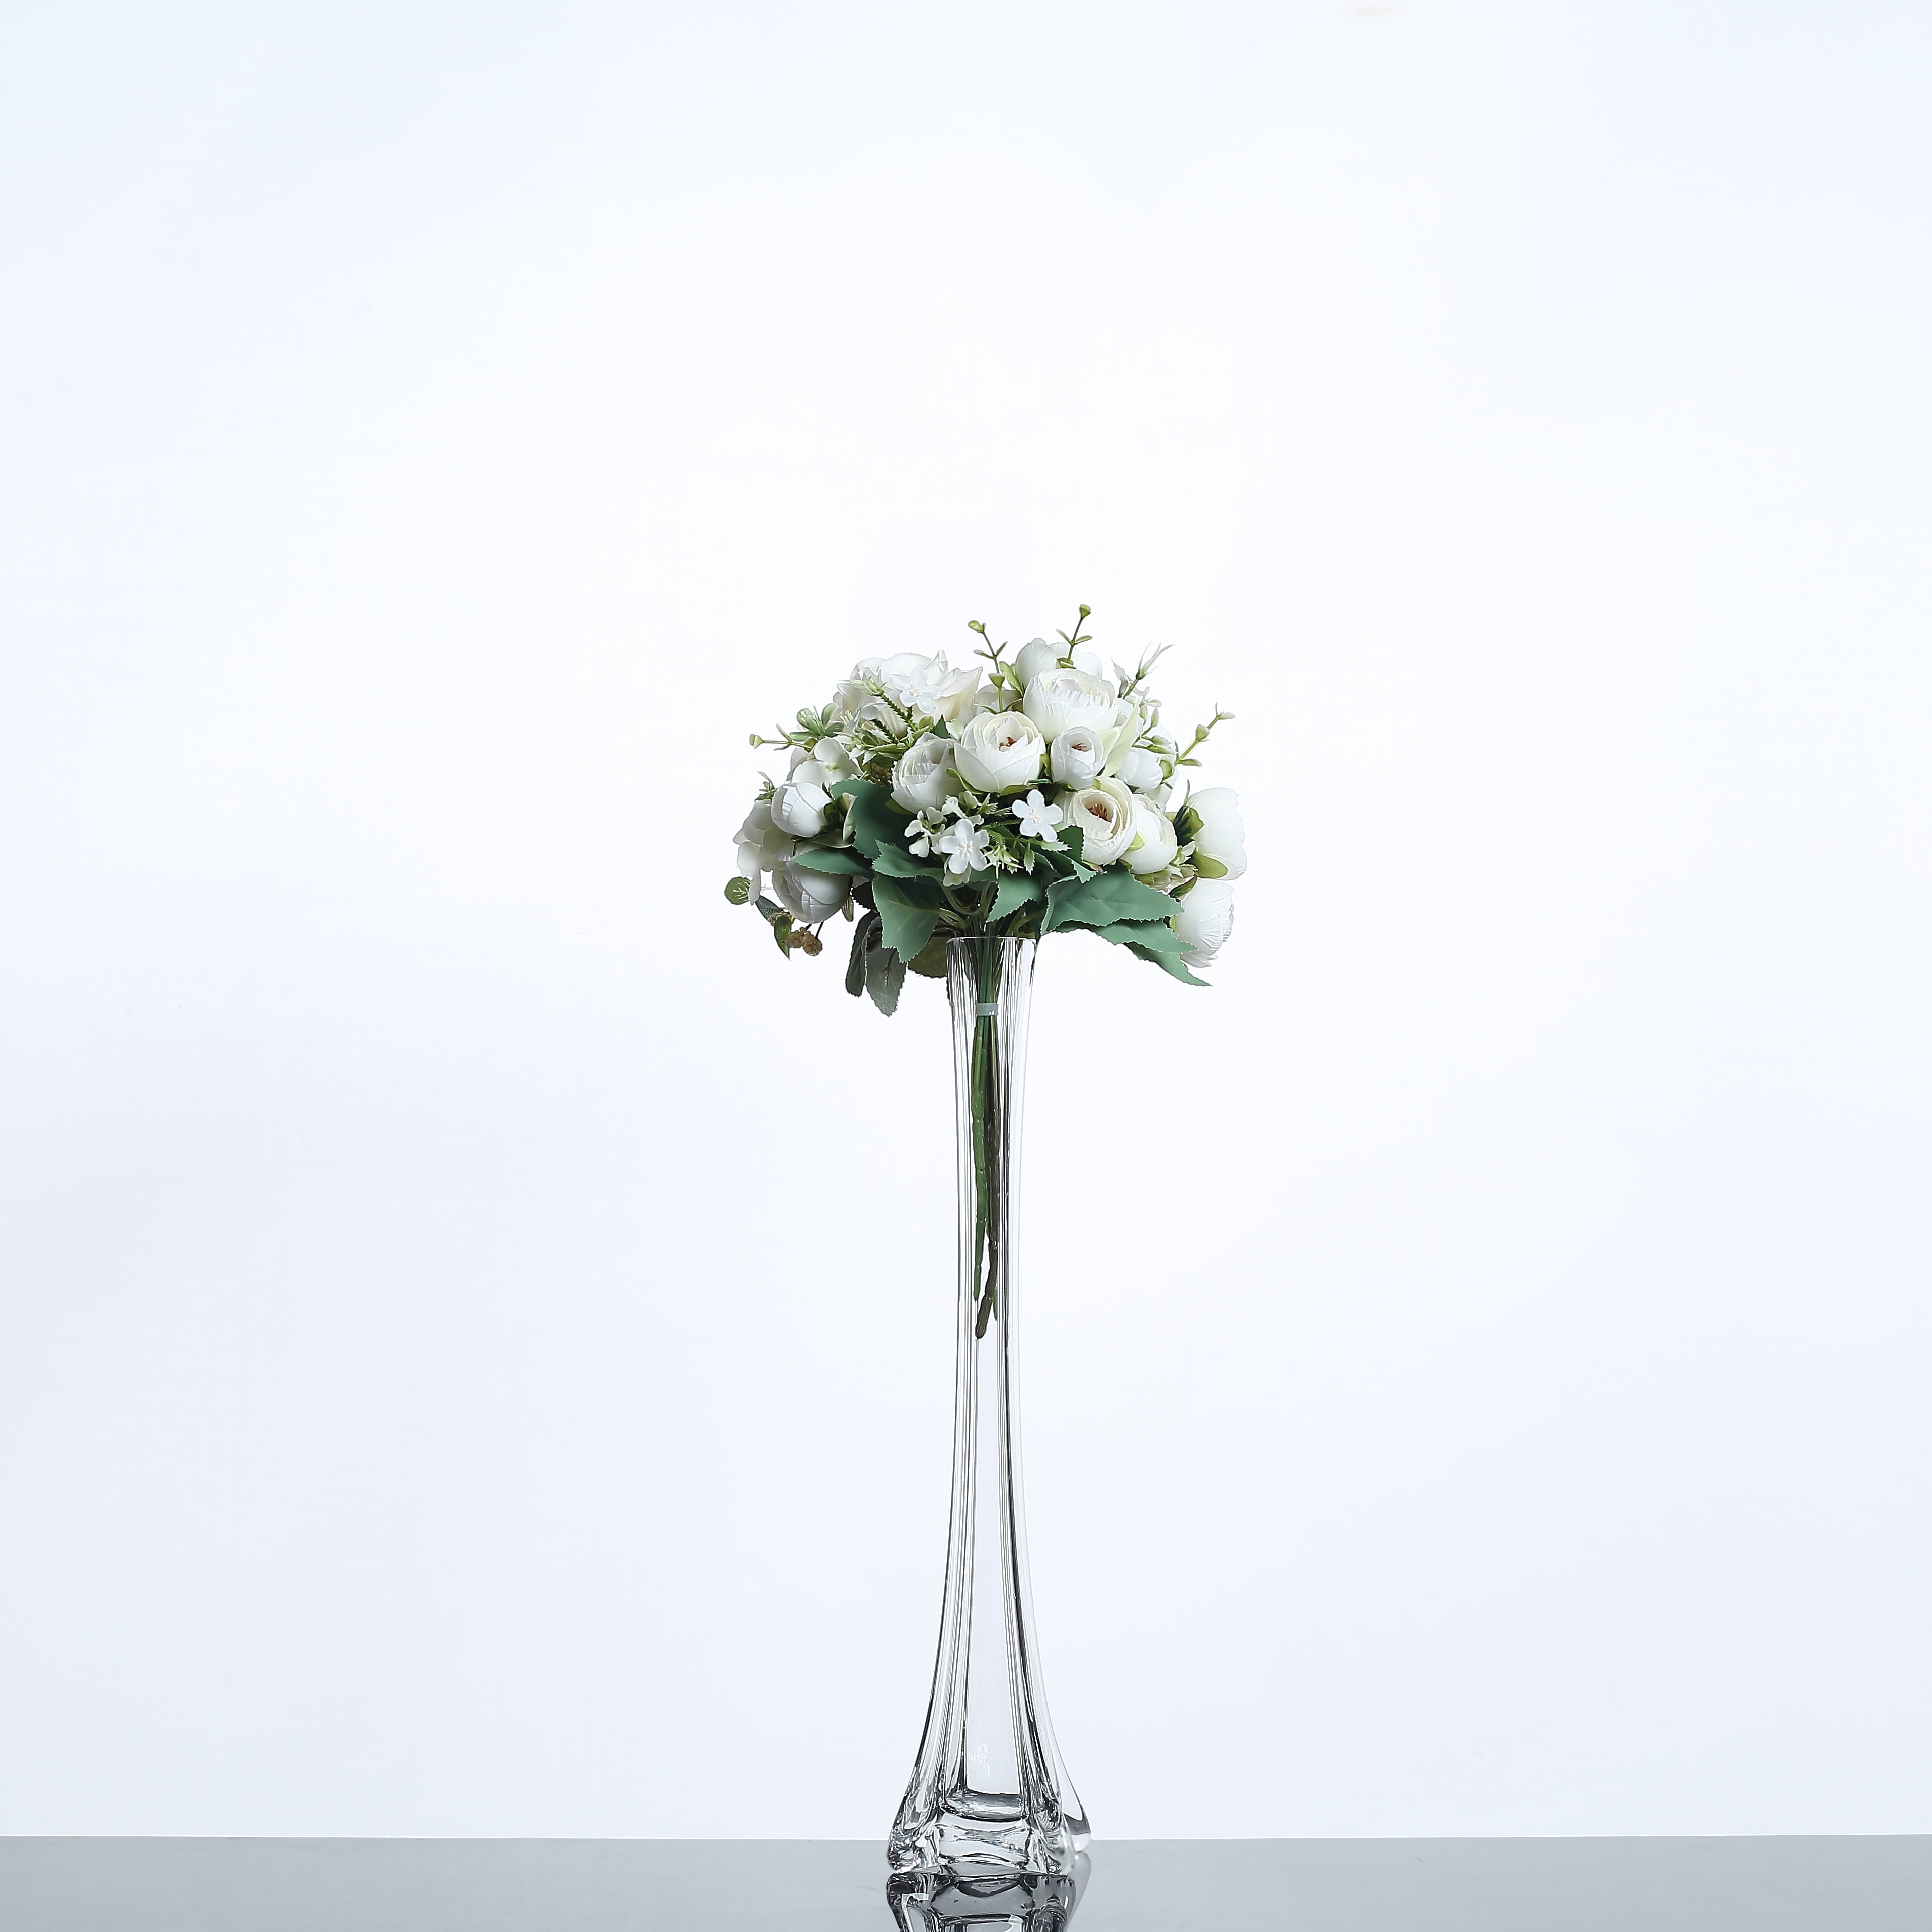 4 Pcs Eiffel Tower Vase Tall Glass Eiffel Tower Vases Clear Tower Vases  Table Centerpiece Flower Container Vases with Sturdy Base for Centerpieces